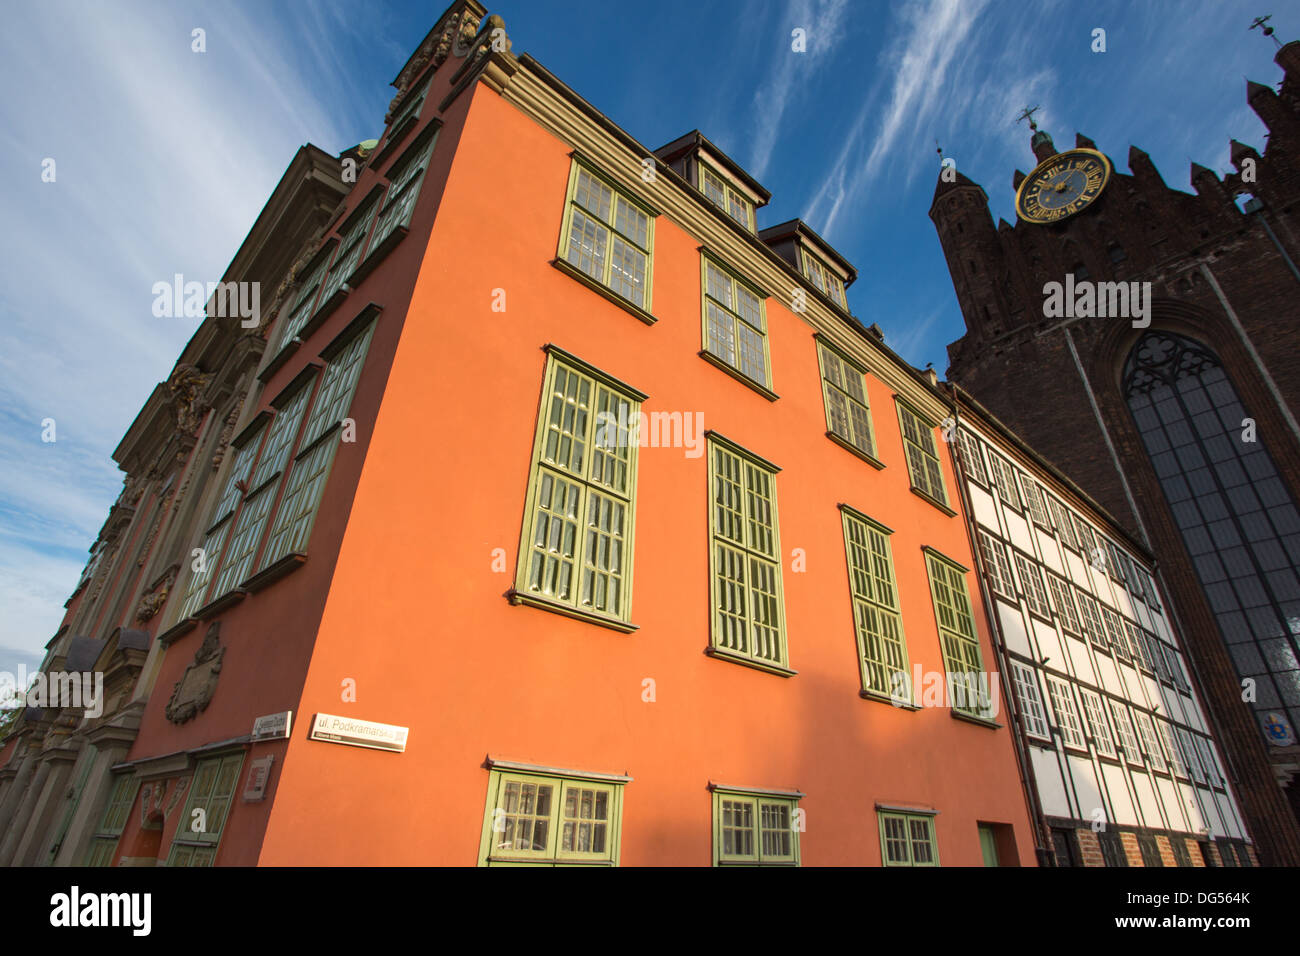 Detail of classical architecture in the old town of Gdansk, Poland Stock Photo